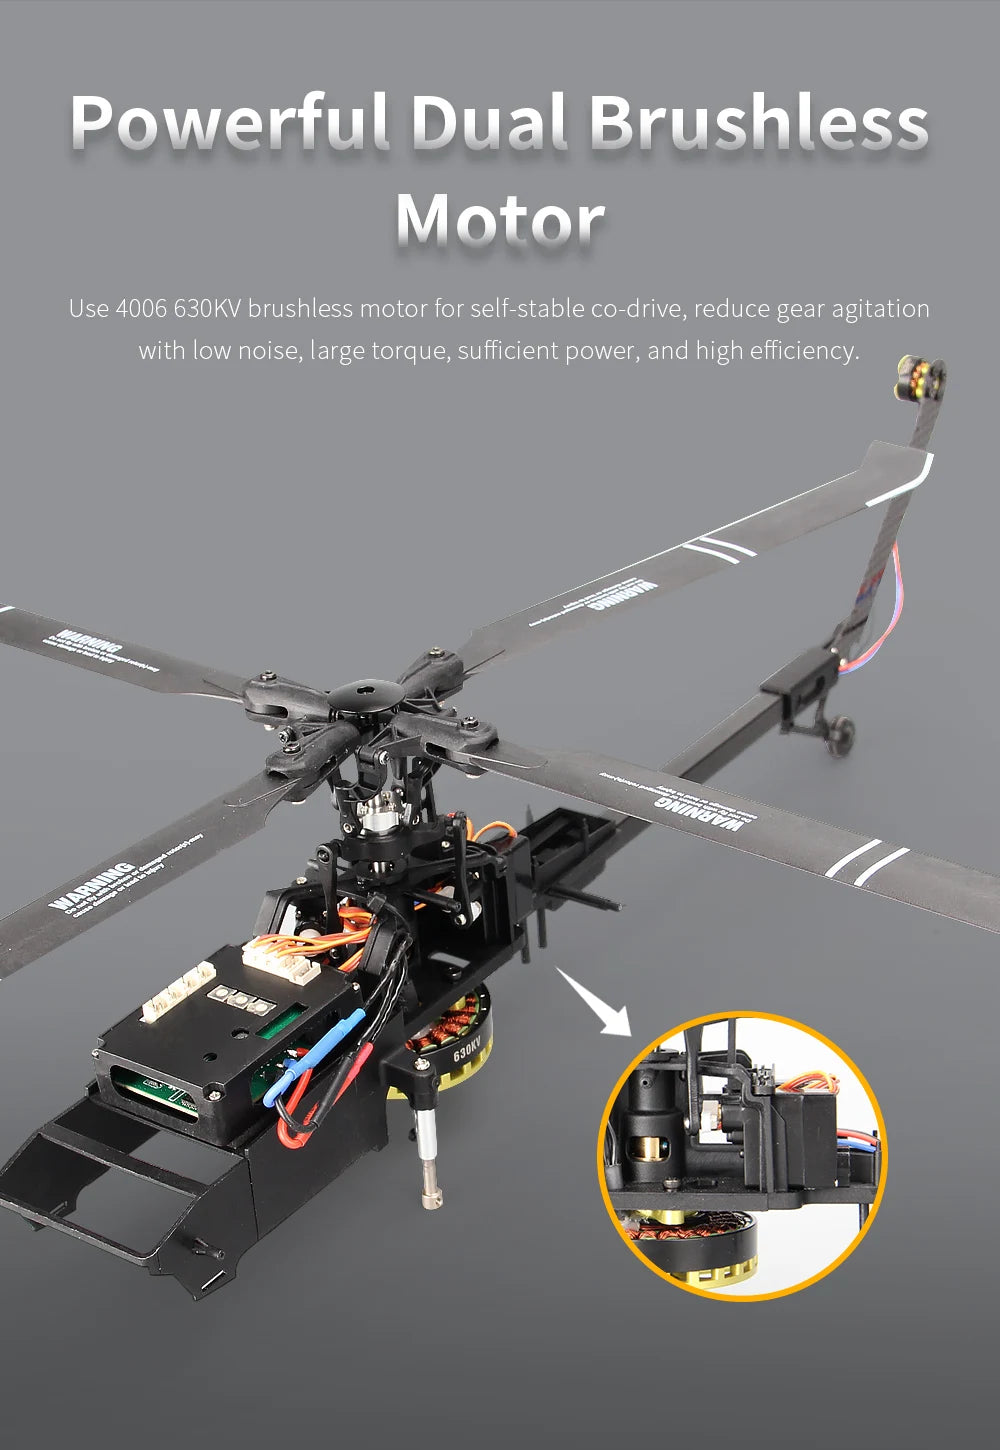 YXZNRC F09 RC Helicopter, powerful dual brushless motor for self-stable co-drive, reduce gear agitation